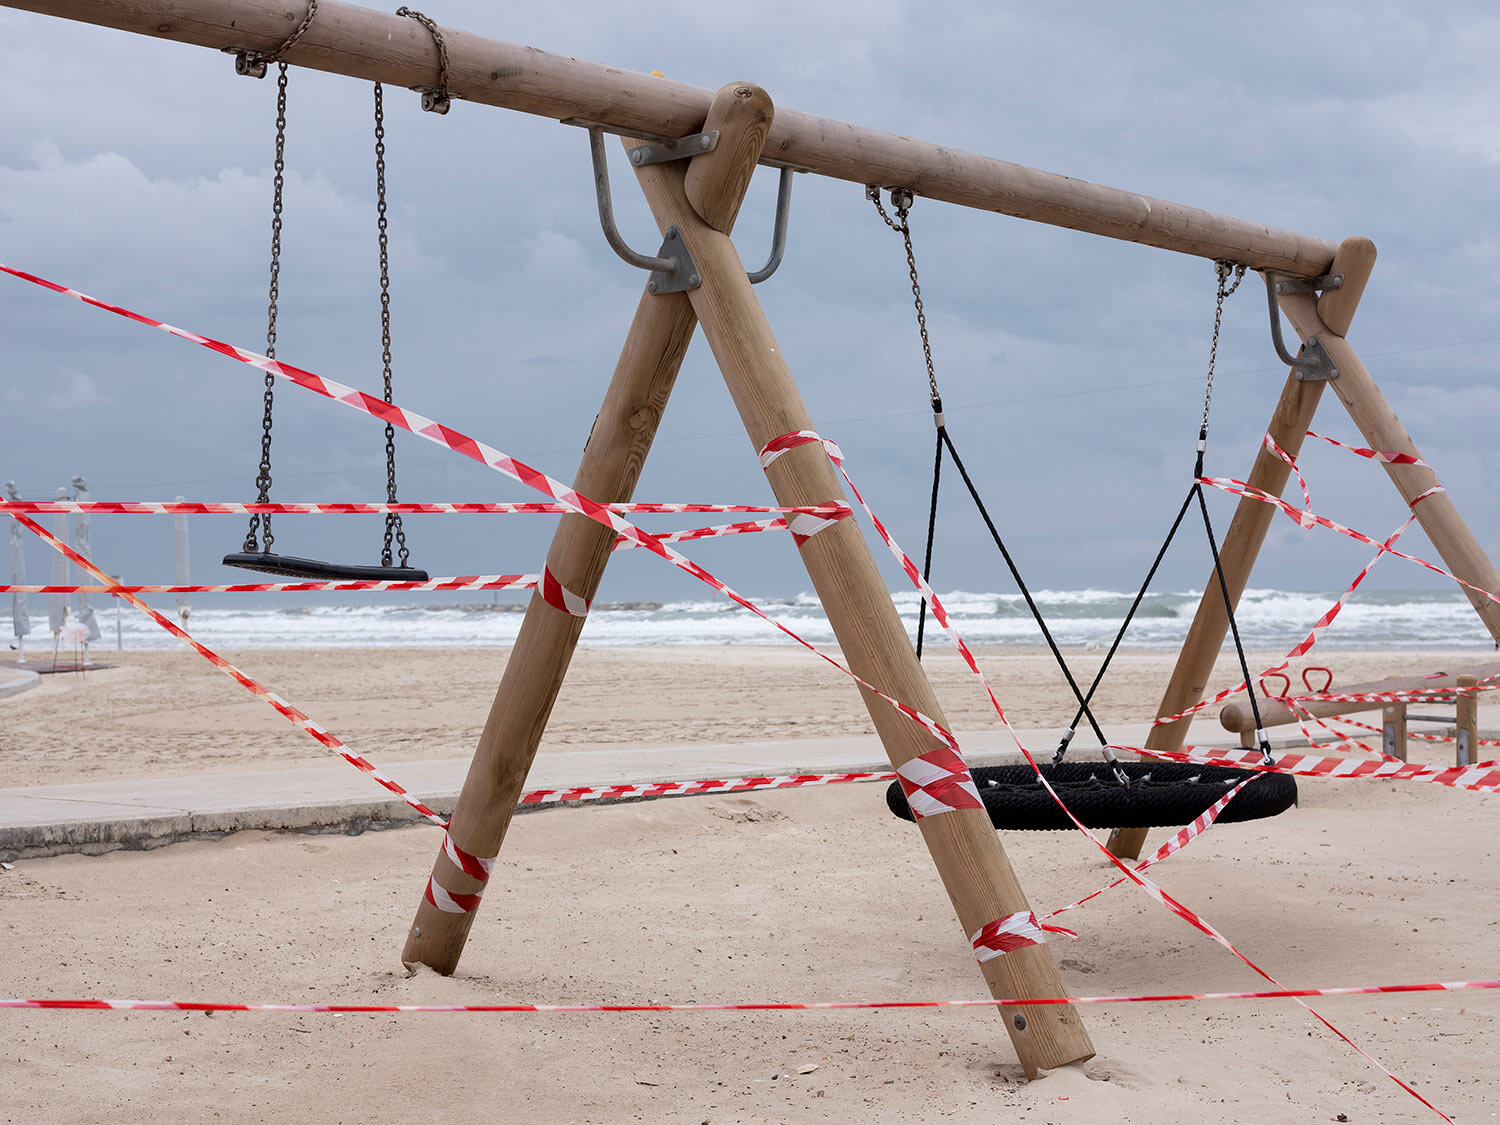  This Friday, March 20, 2020 photo shows swings at Tel Aviv's beachfront wrapped in tape to prevent public access. (AP Photo/Oded Balilty) 